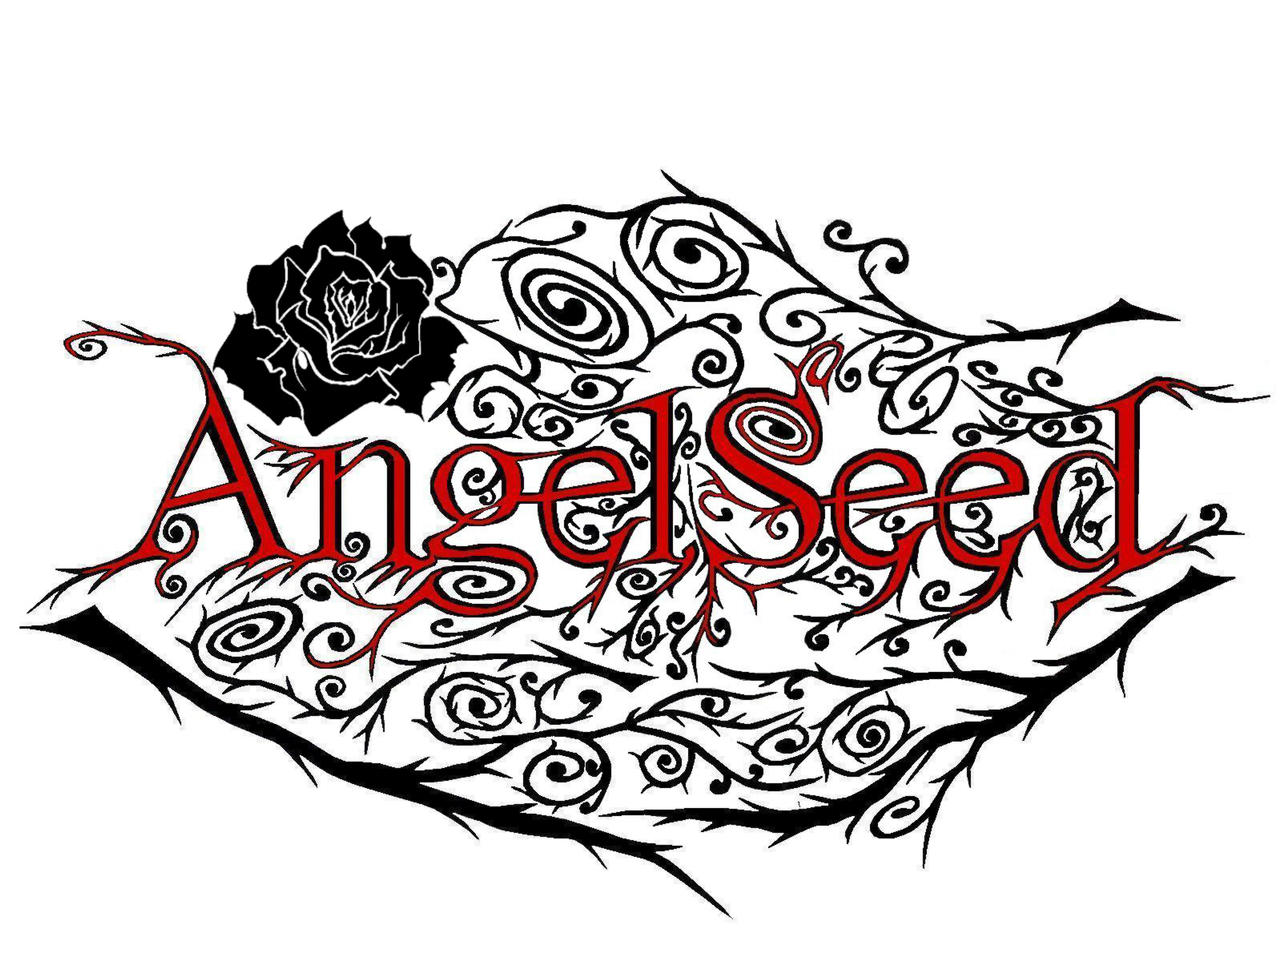 Tribal angel seed logo picture by Auronff10 on deviantART